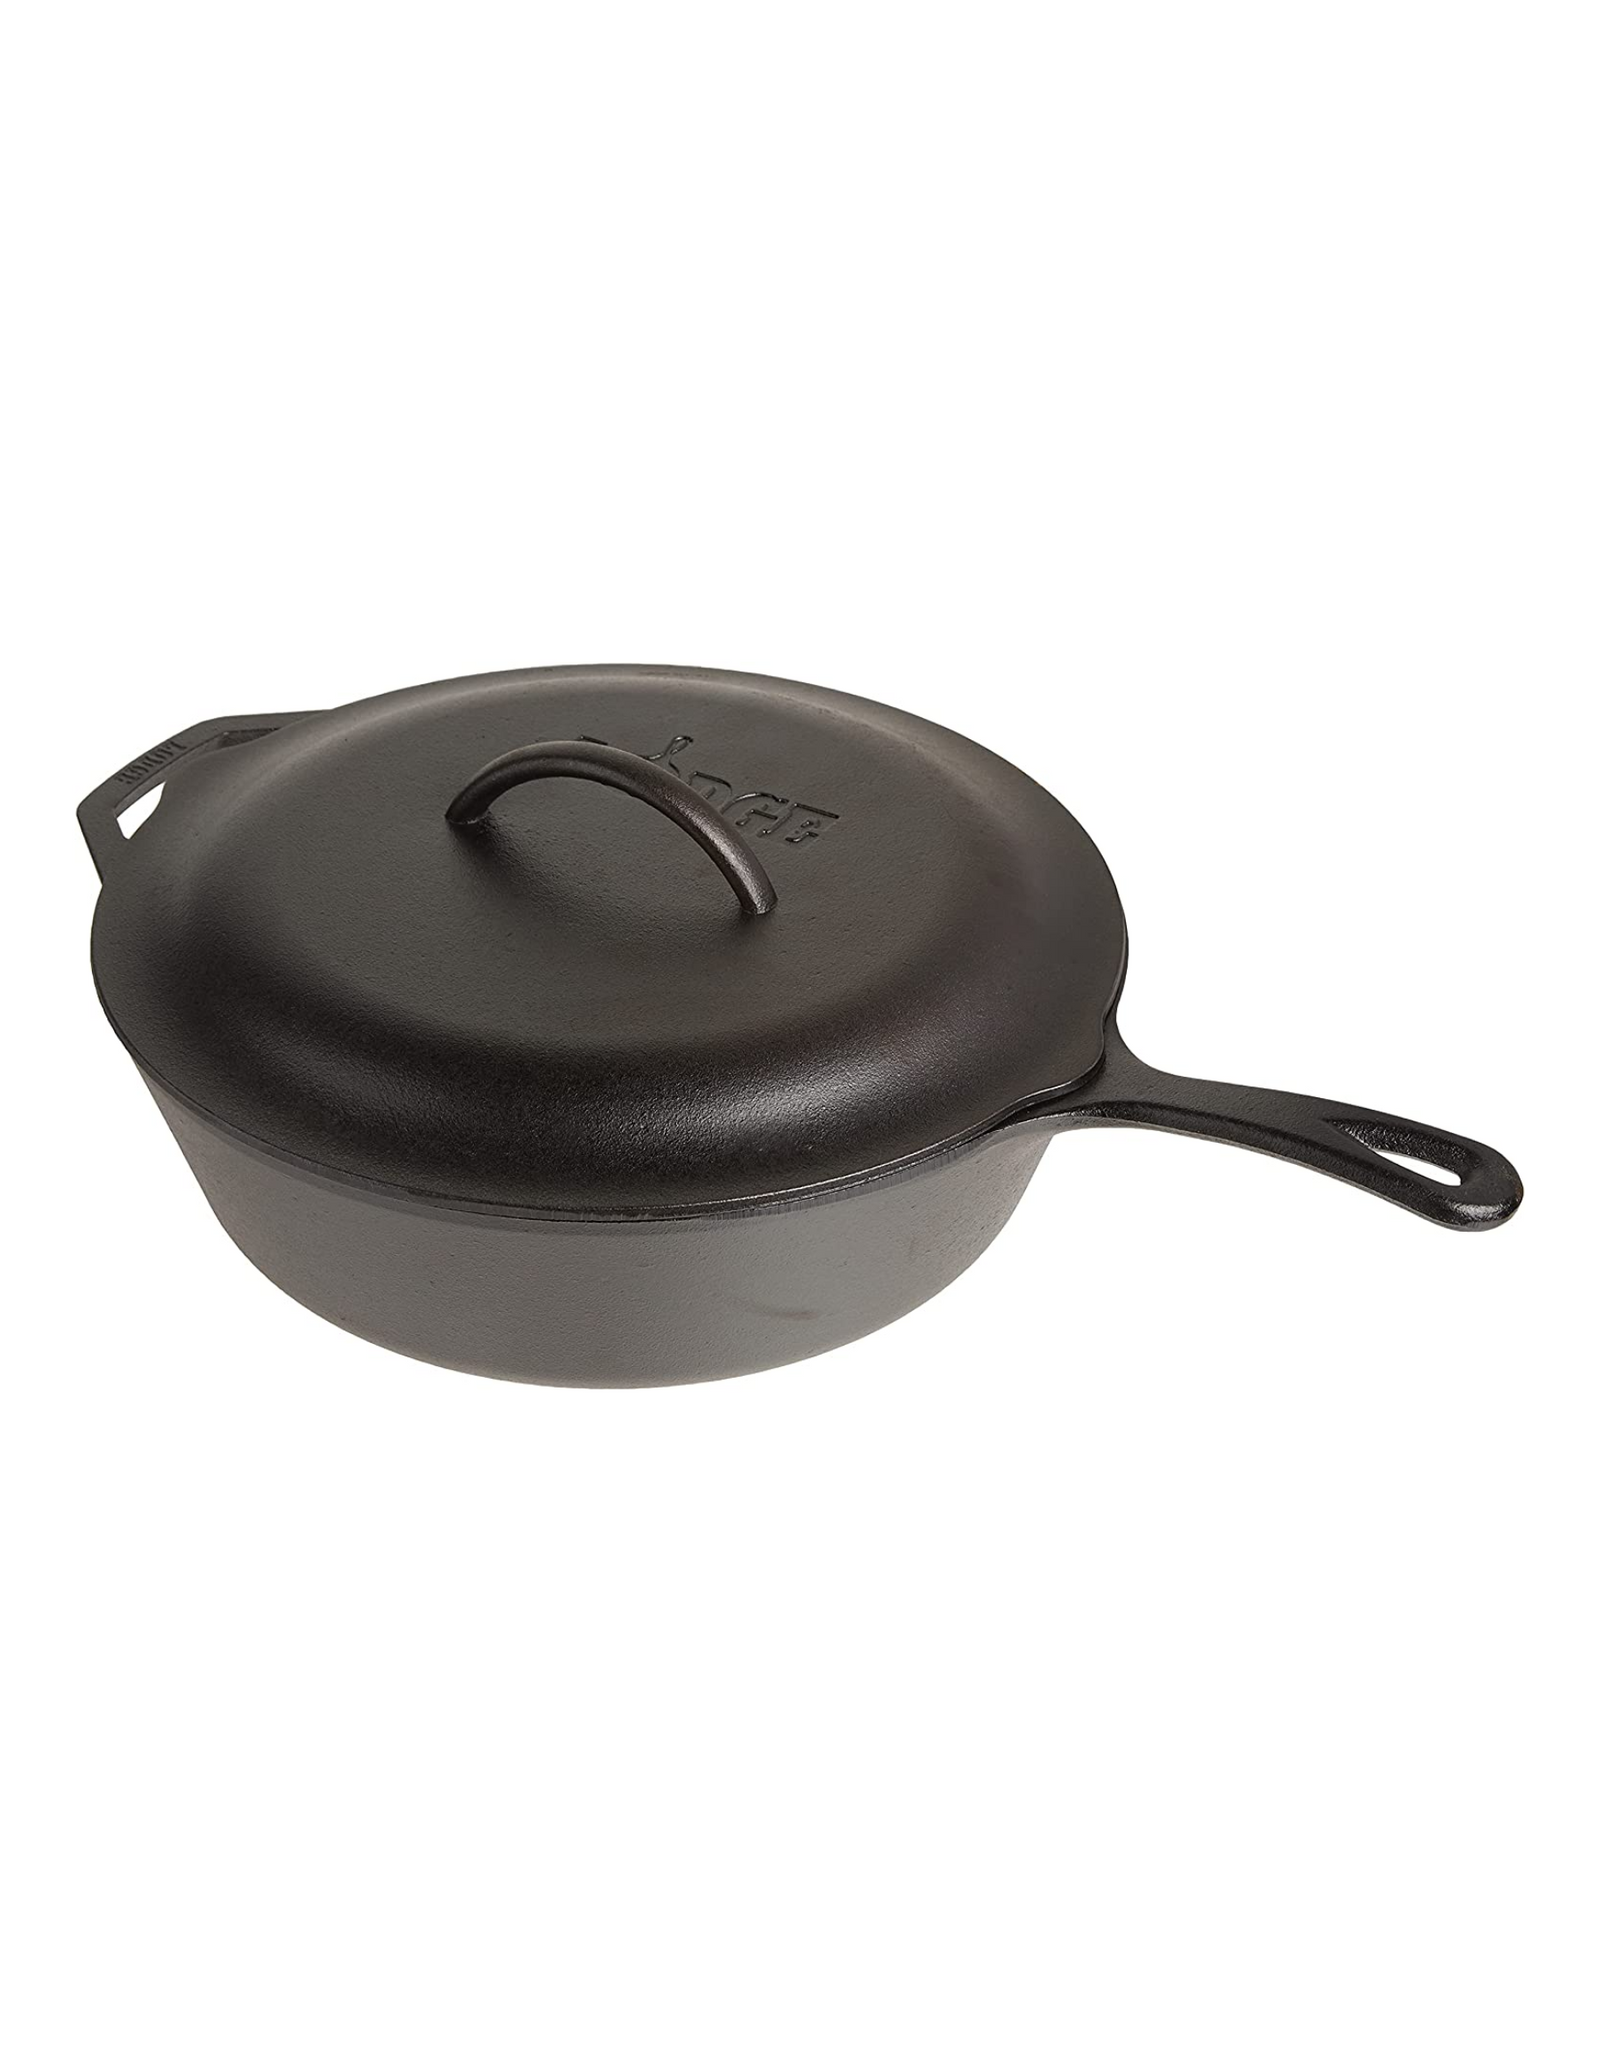 Lodge Pre-Seasoned Cast Deep Skillet with Iron Cover and Handle, 5 Quart, Black